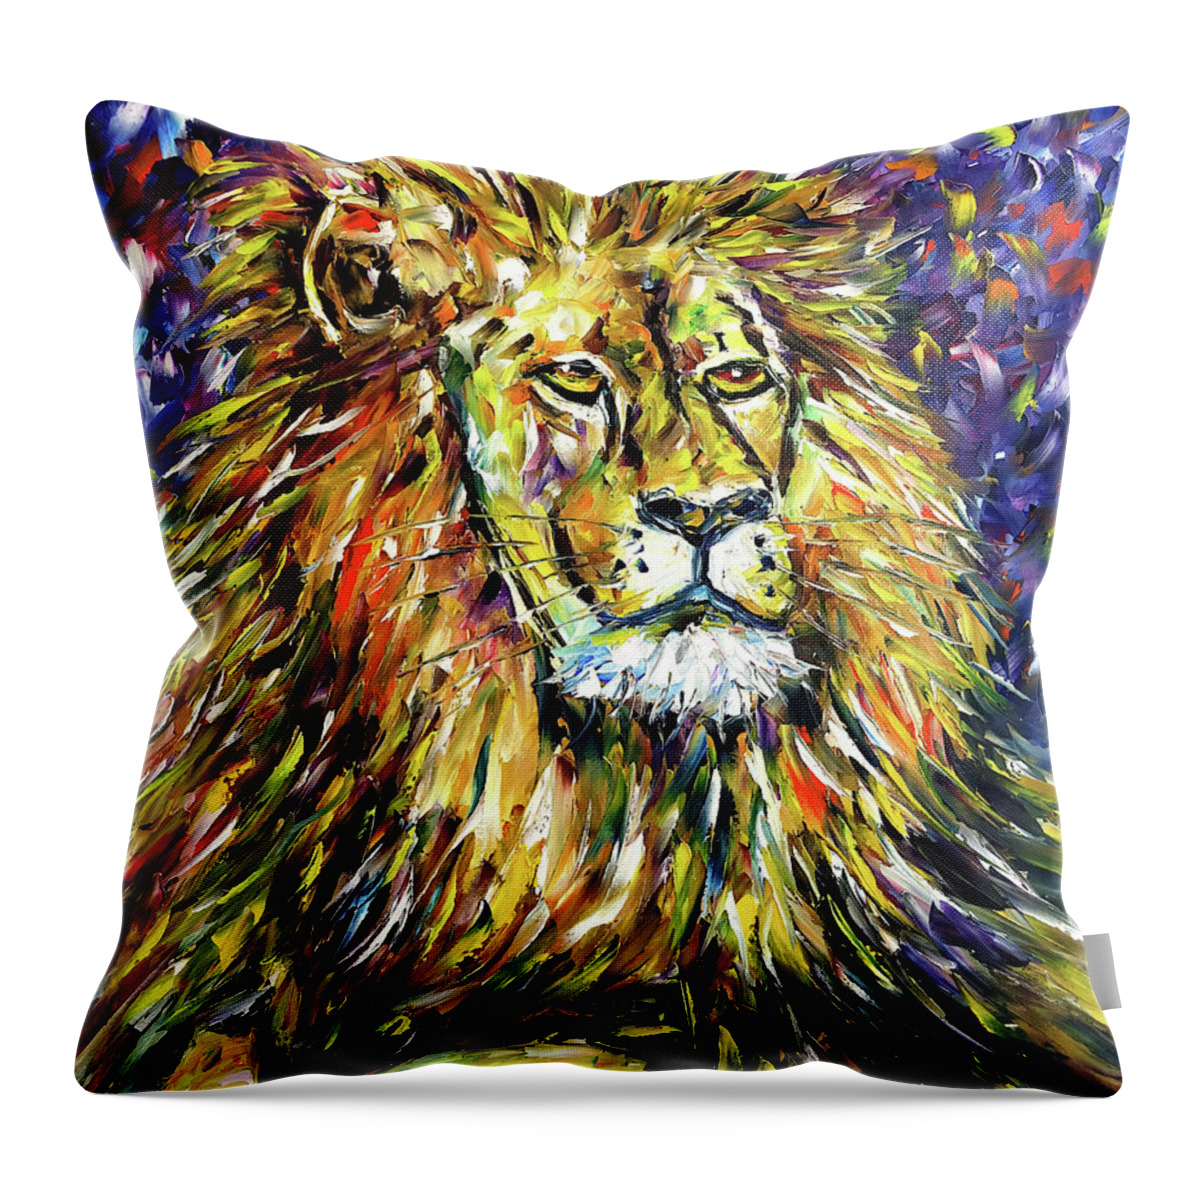 King Lion Painting Throw Pillow featuring the painting Portrait Of A Lion by Mirek Kuzniar